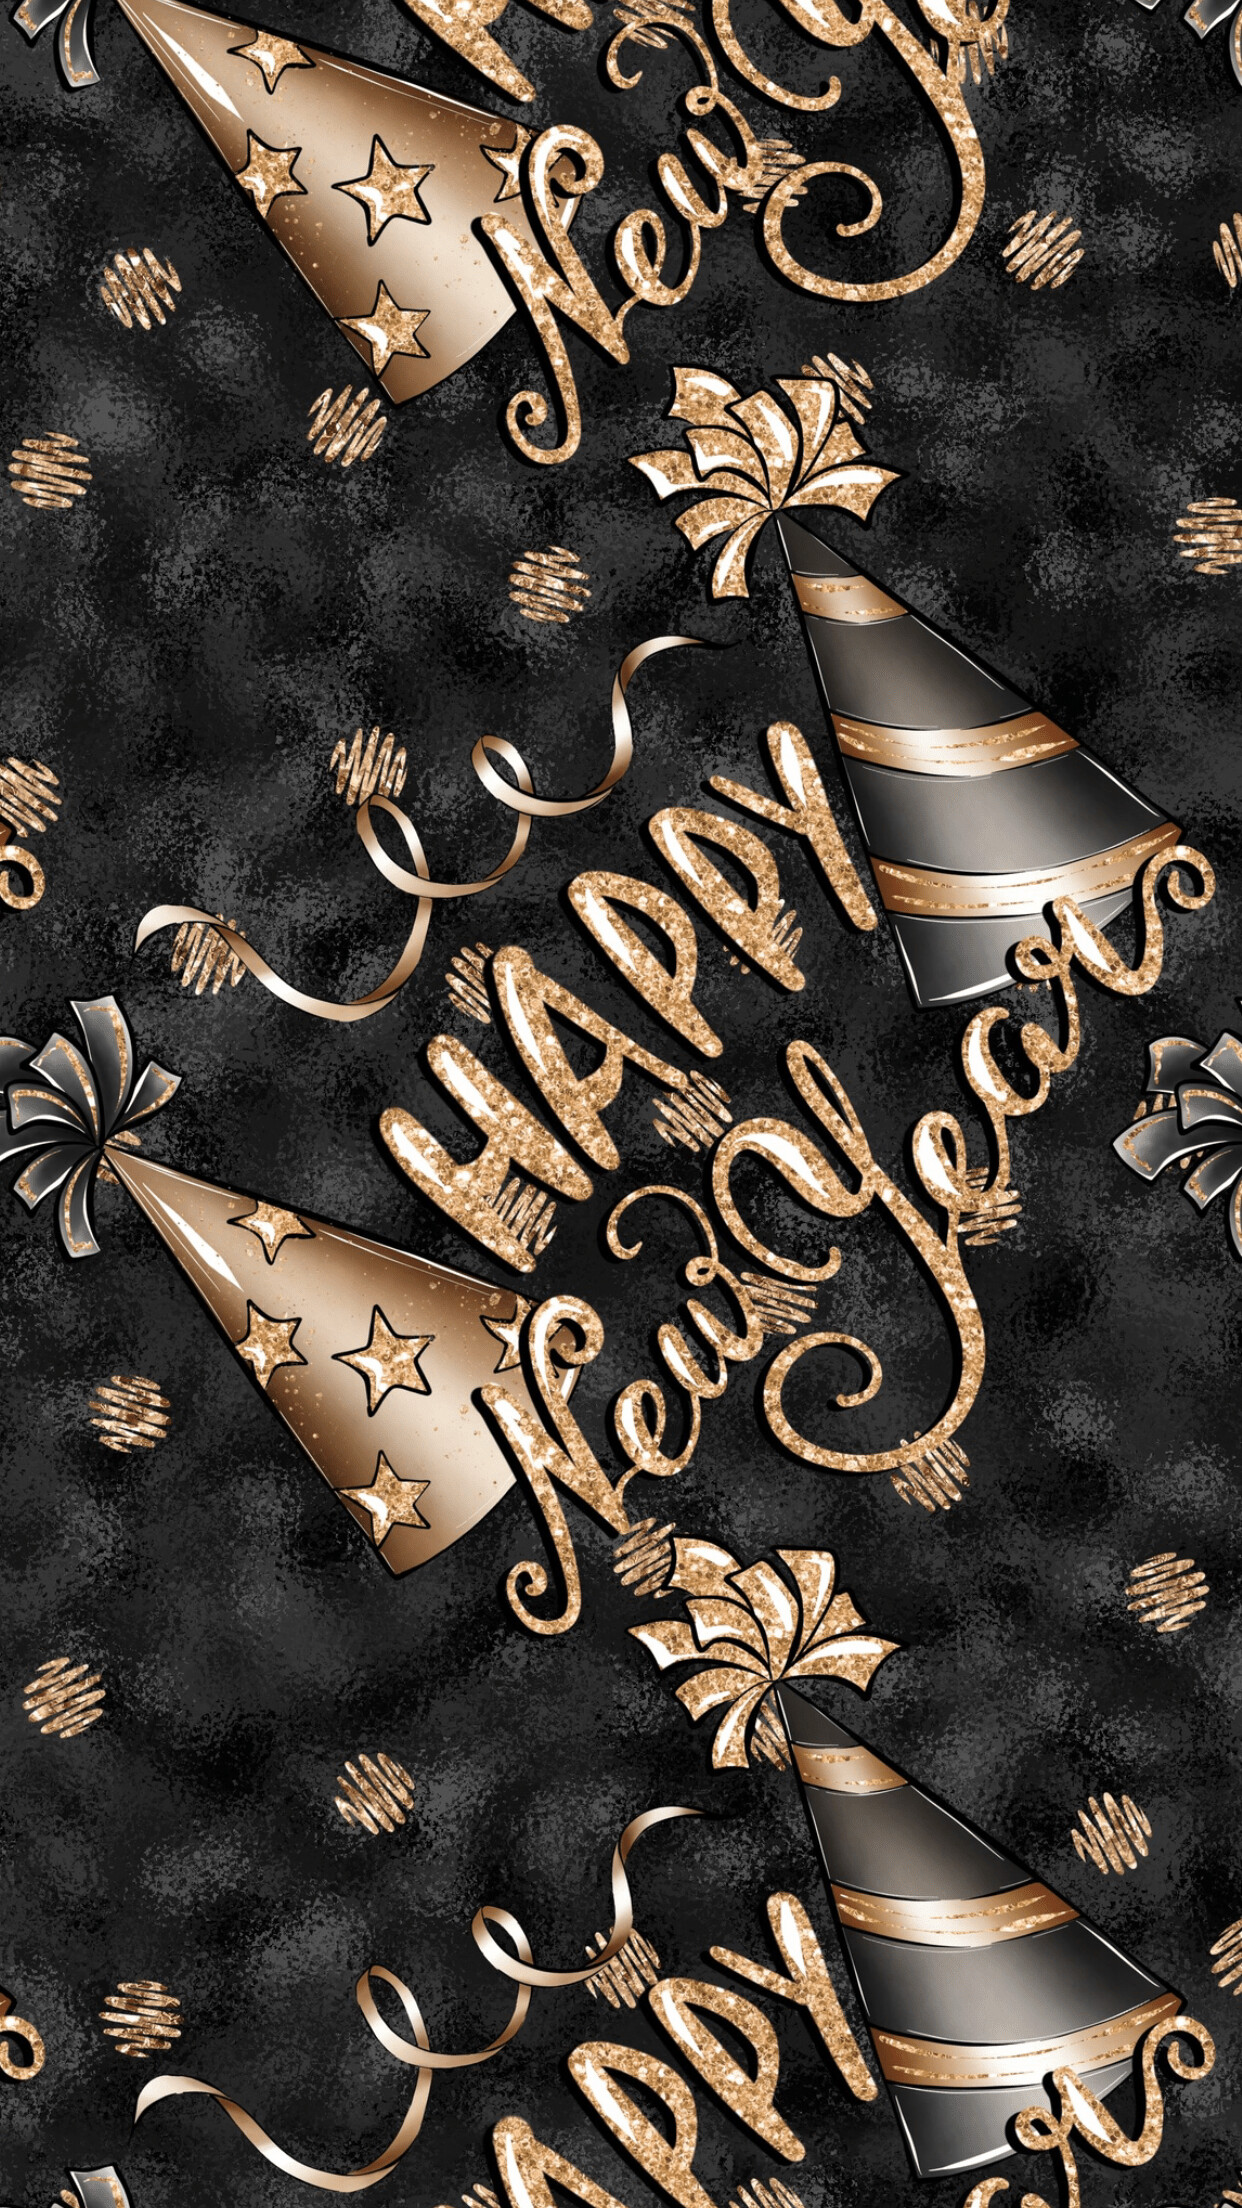 New Year: January 1, Marks the start of a new period according to the Gregorian calendar. 1250x2210 HD Wallpaper.